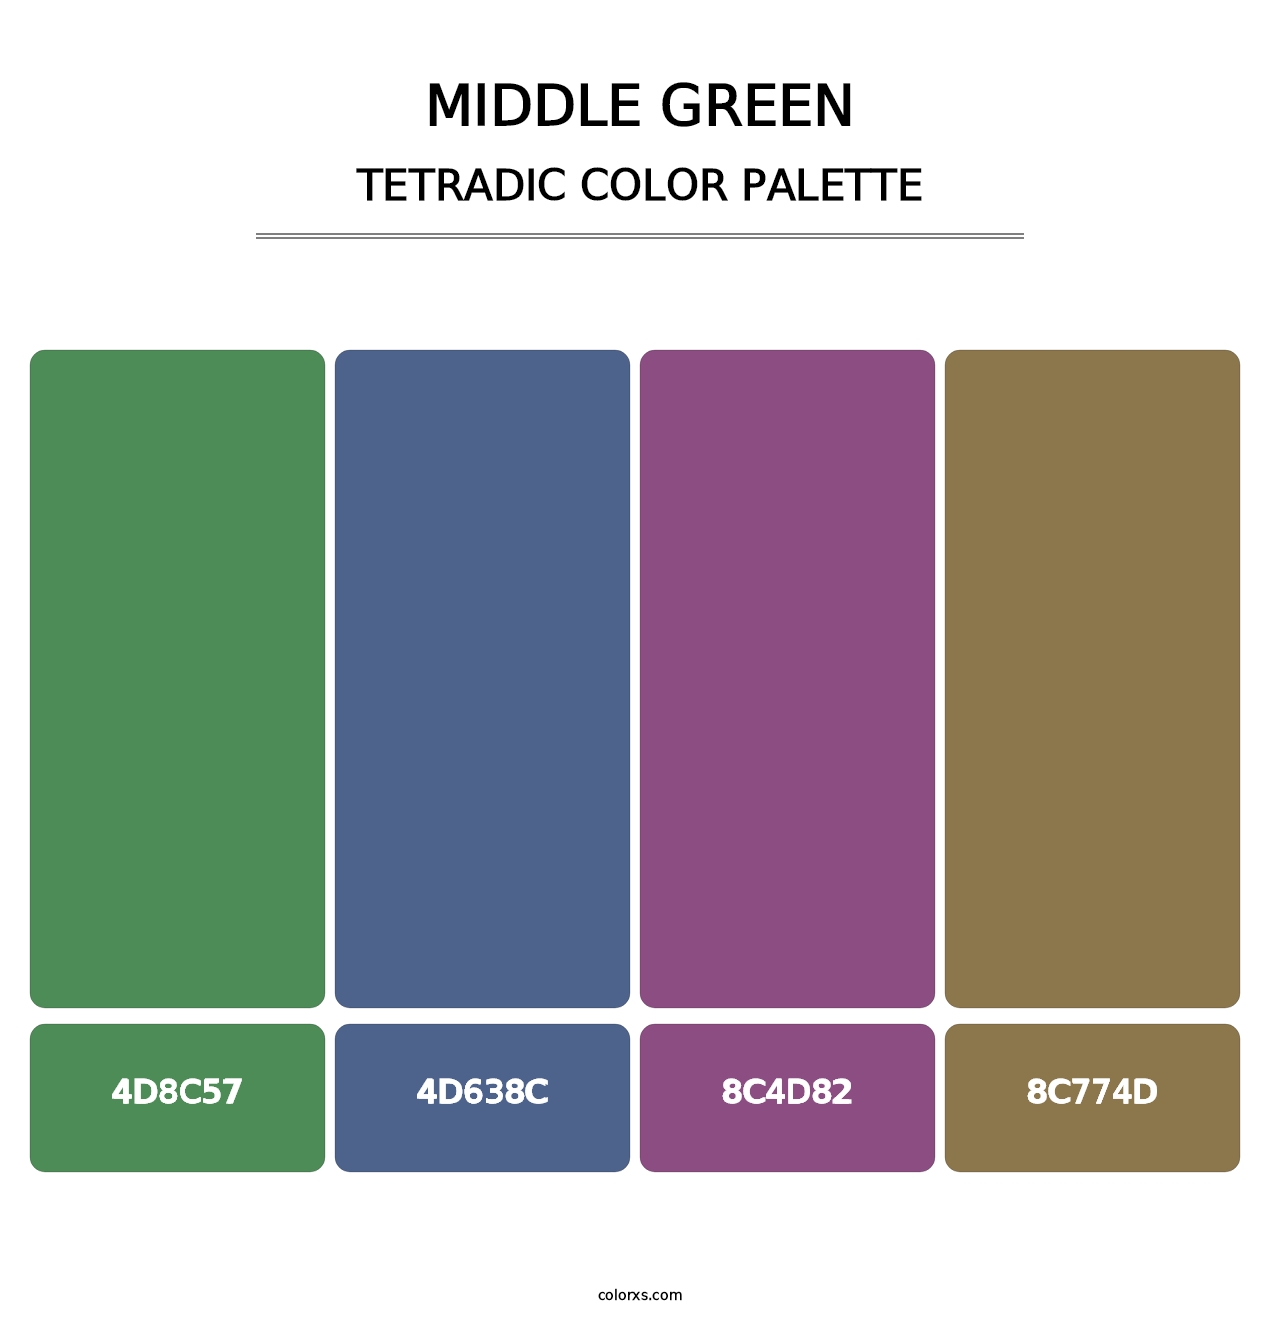 Middle Green - Tetradic Color Palette